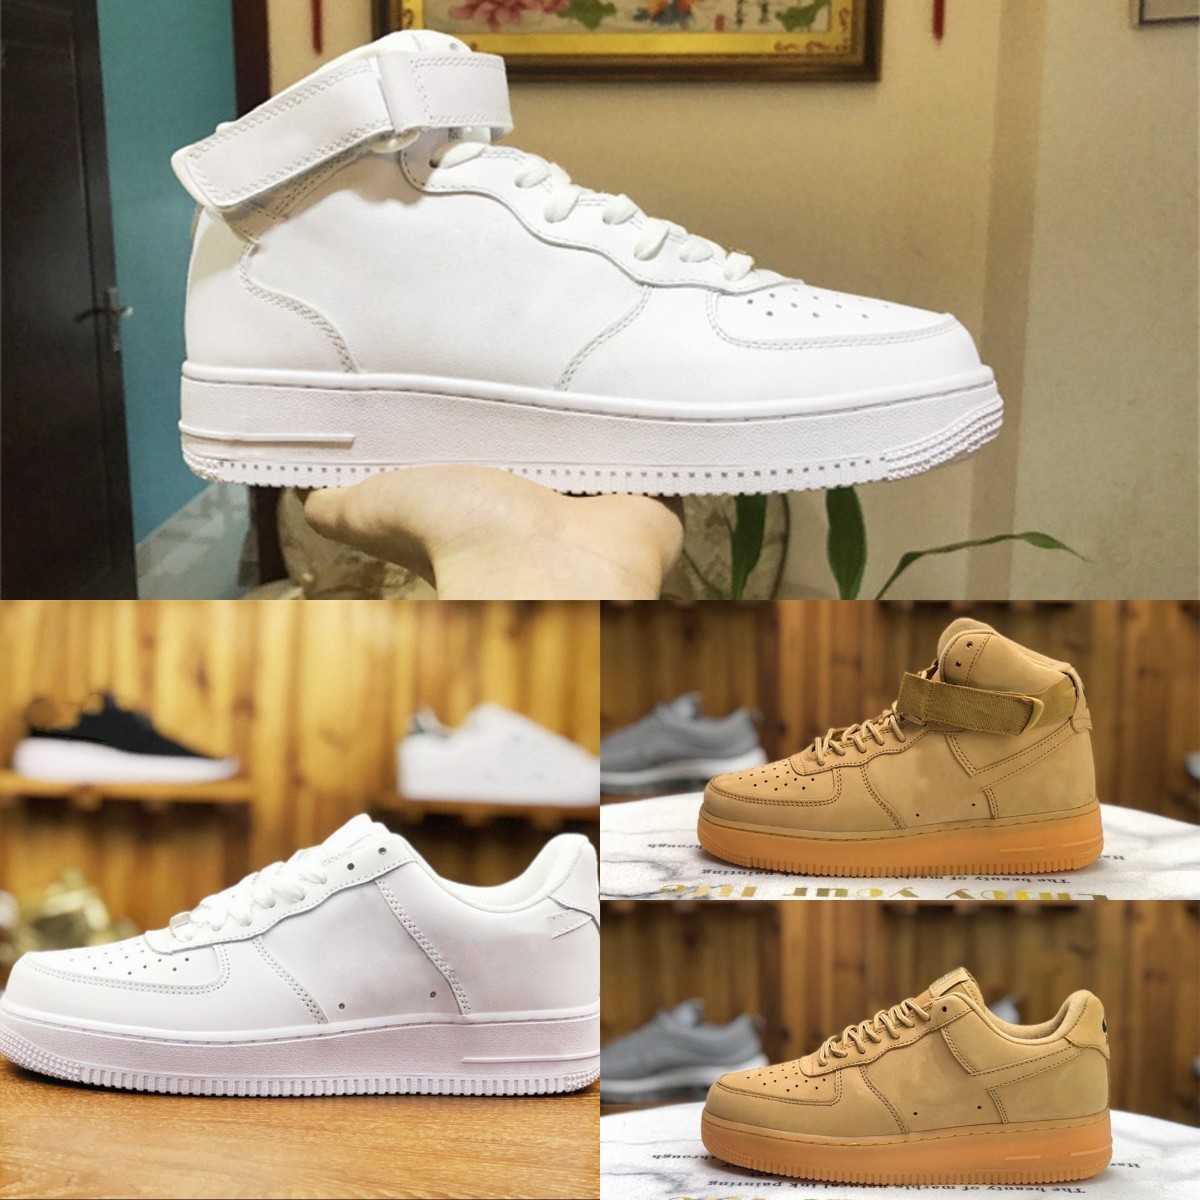 

Designer 2023 New FoRcEs Outdoor Men Low Skateboard Shoes Discount One Unisex Classic 1 07 Knit Euro Airs High Women All White Black Wheat Running Sports Sneakers S01, Please contact us